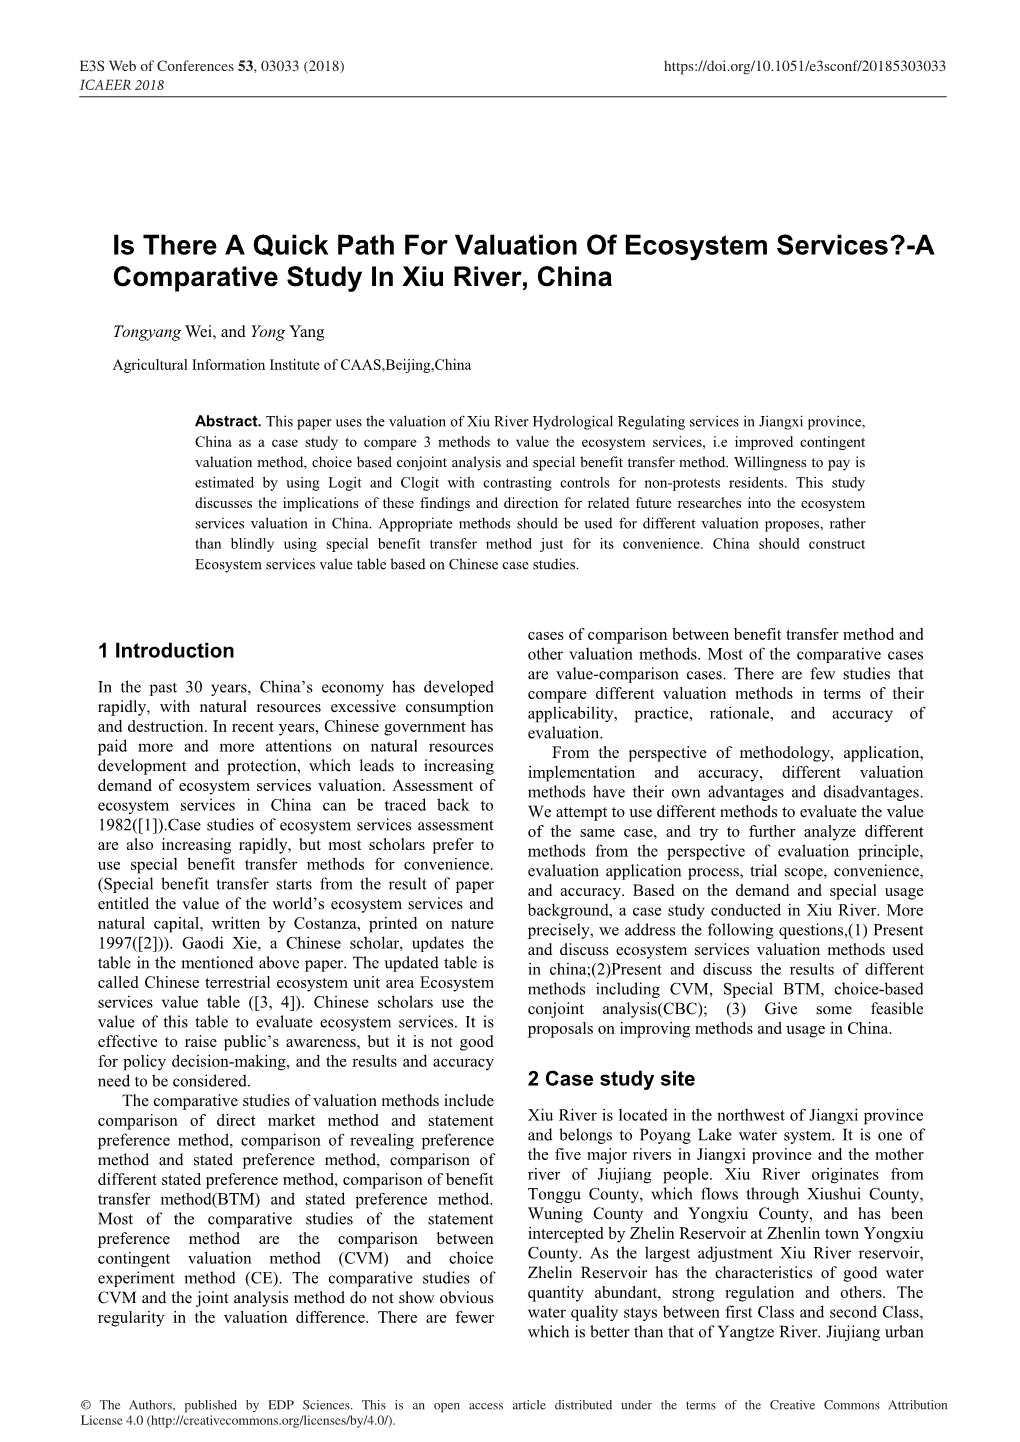 Is There a Quick Path for Valuation of Ecosystem Services?-A Comparative Study in Xiu River, China